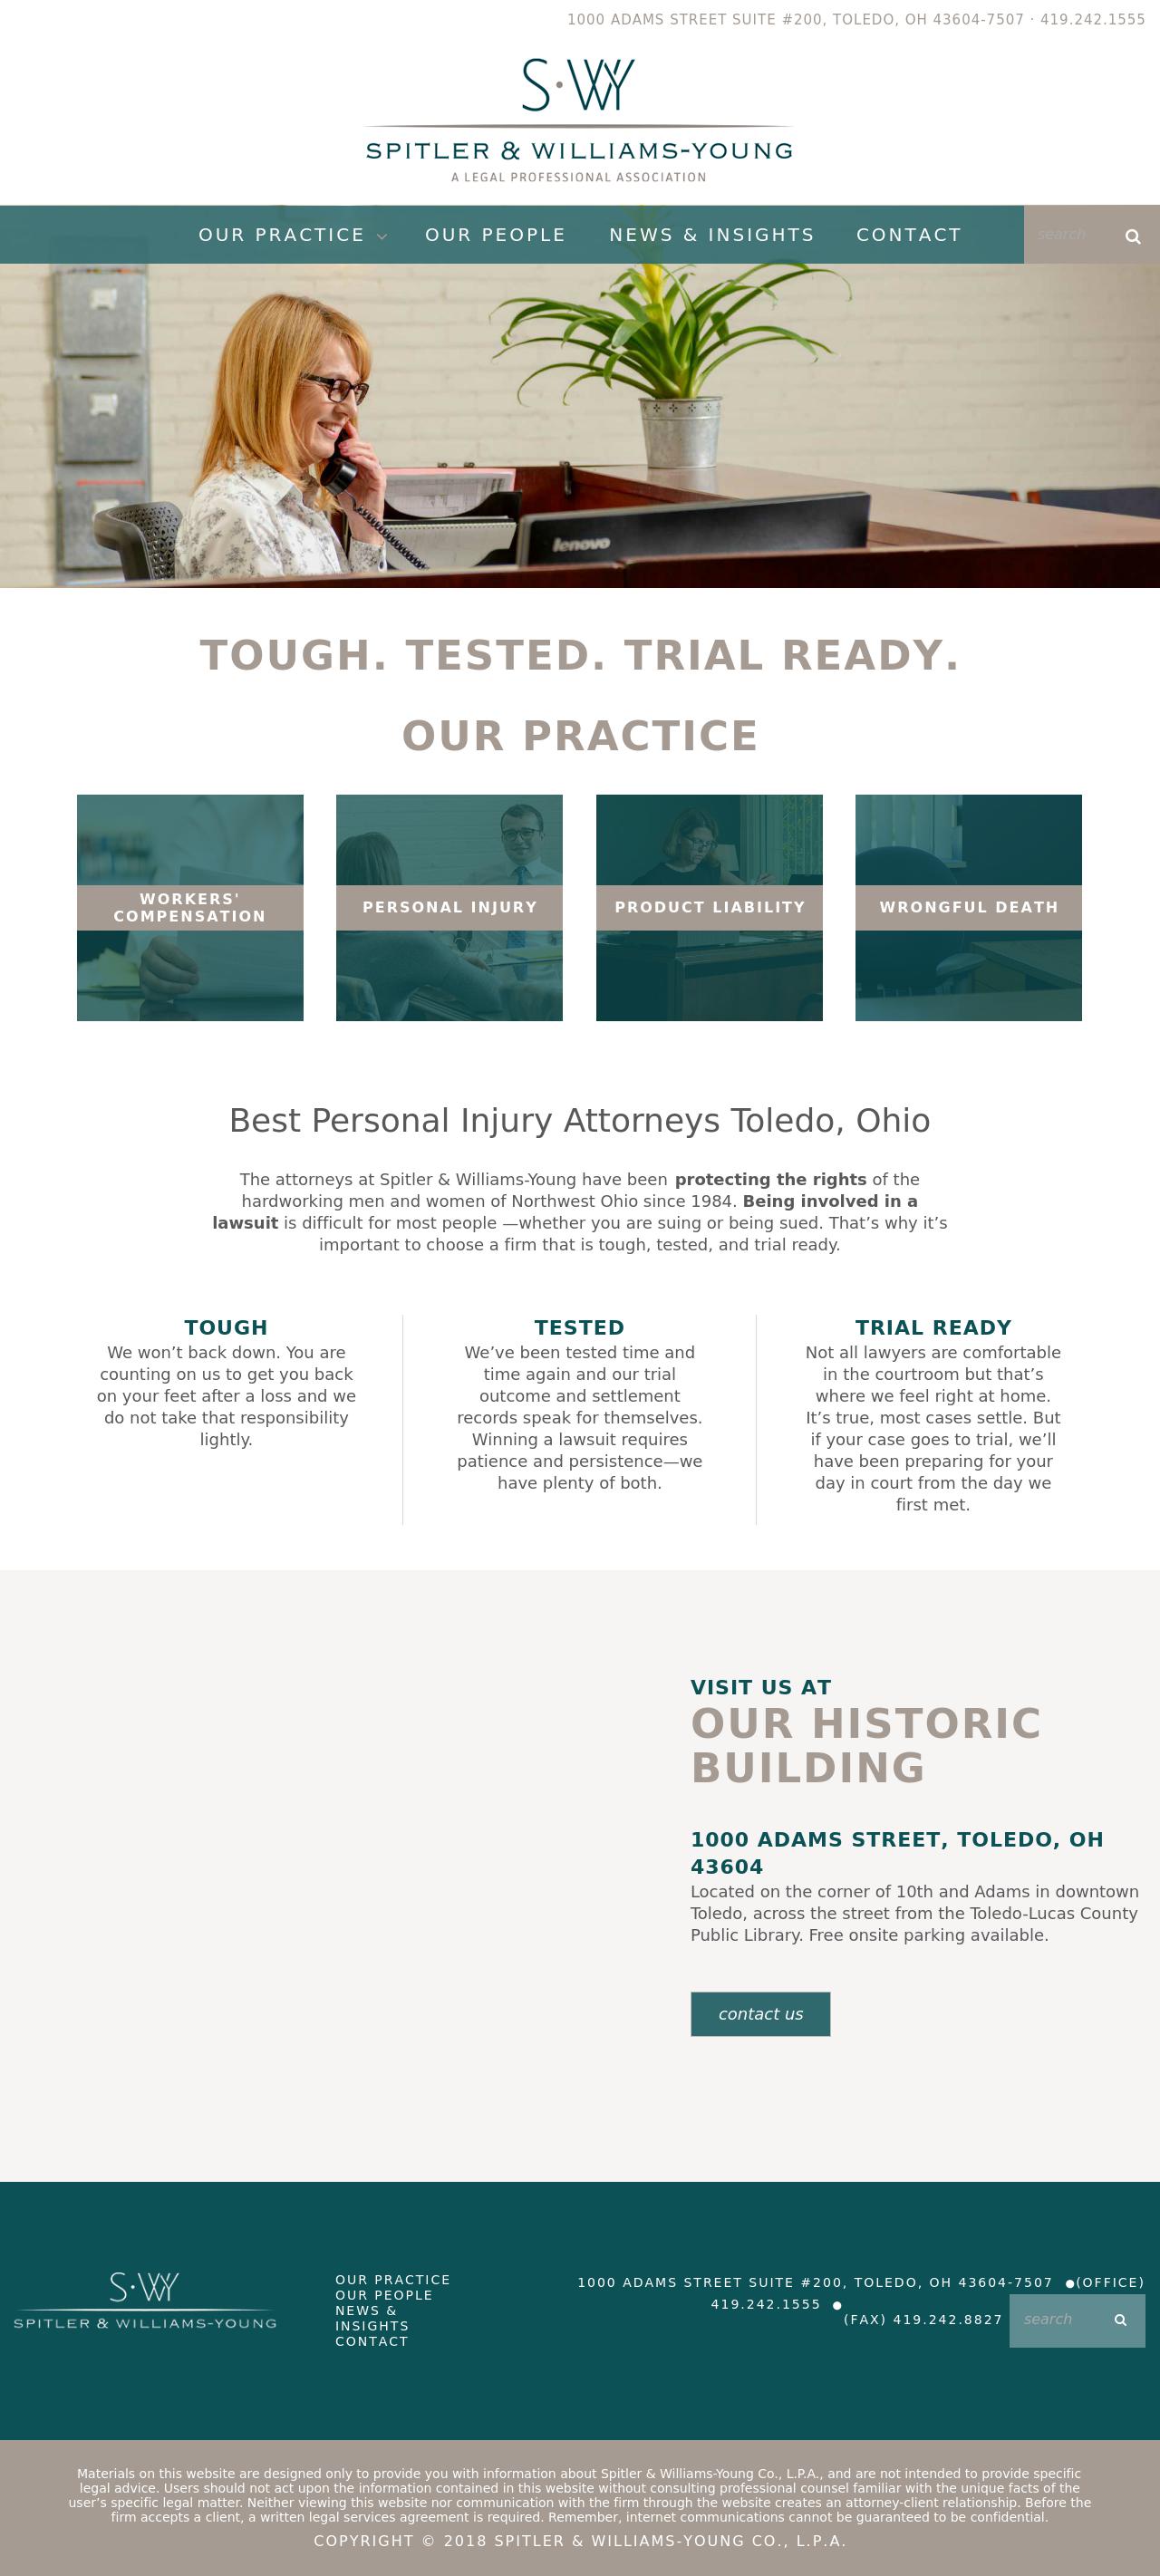 Spitler & Williams-Young Co LPA - Toledo OH Lawyers